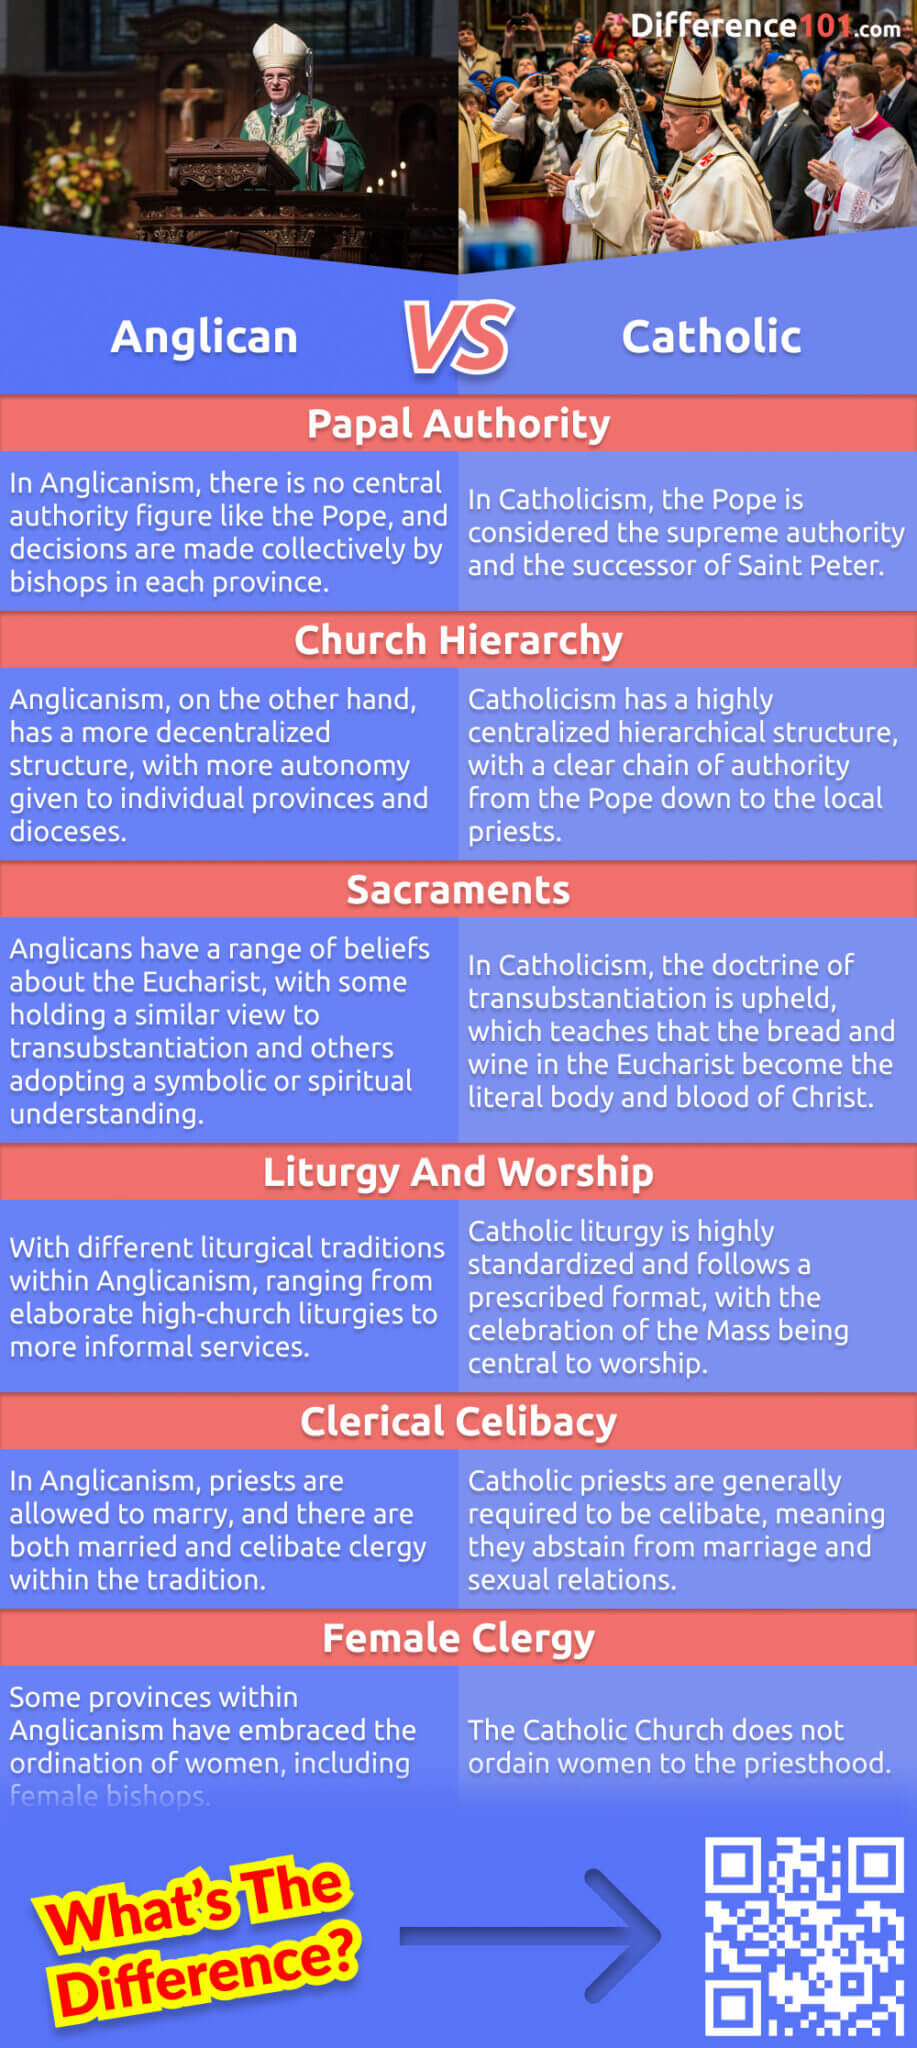 Do you know the difference between Anglicans and Catholics? Both denominations are prominent in Christianity. We'll explore the history and beliefs of both groups, and help you understand the key distinctions between them.